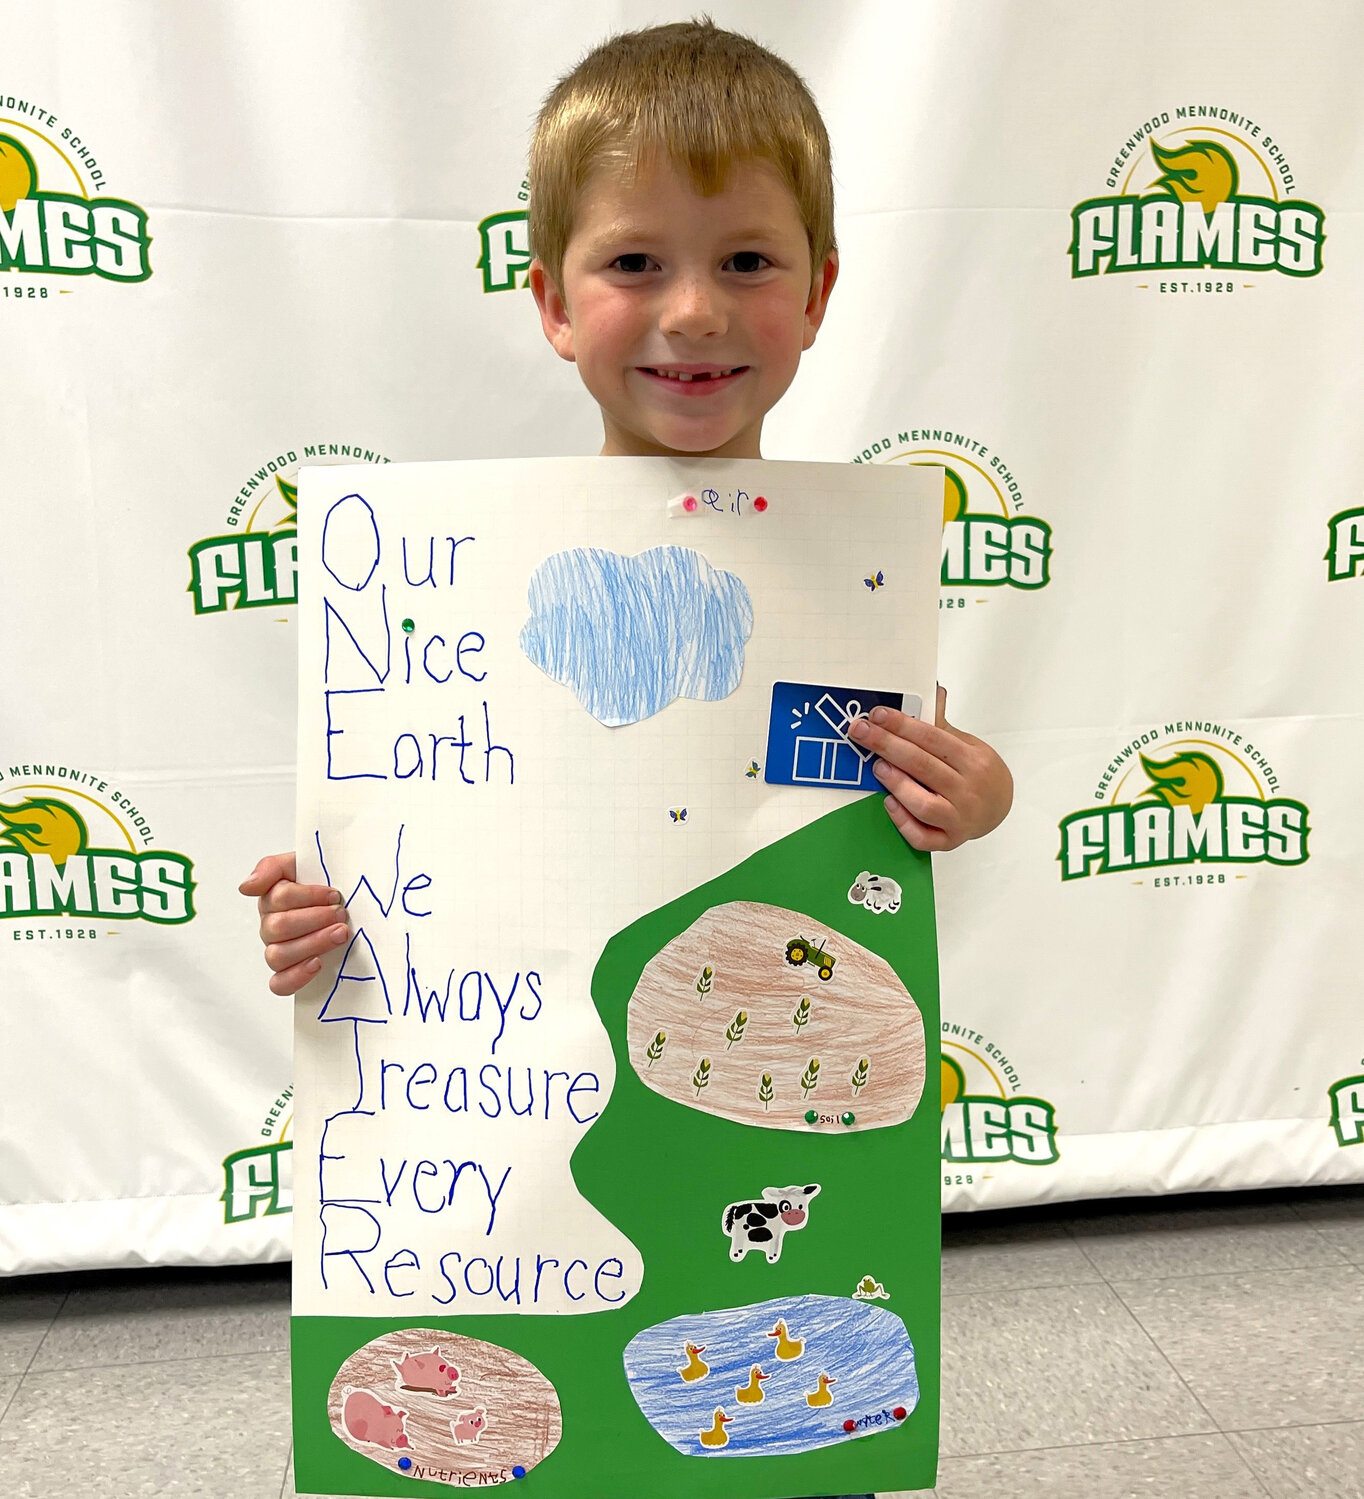 Van Thomas Bull, a kindergartener at Greenwood Mennonite School, placed second in grade category K-1 in the 2023 Sussex County Conservation Poster Contest.